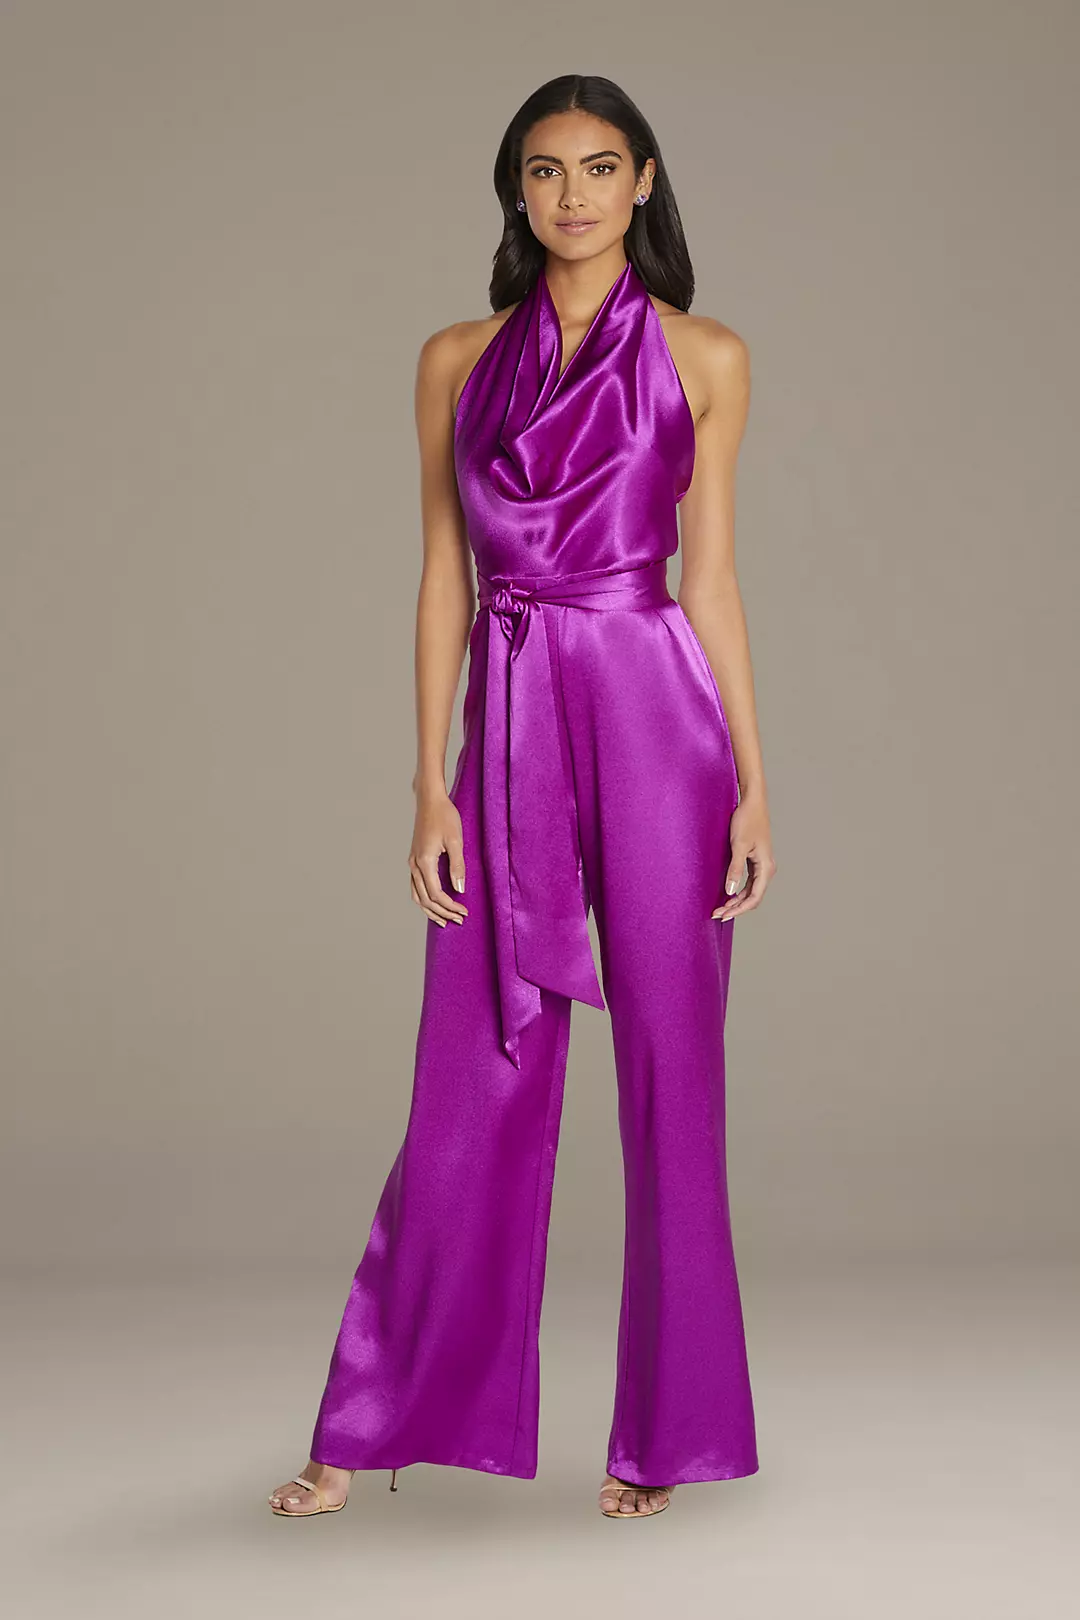 Cowl Neck Satin Halter Jumpsuit with Open Back Image